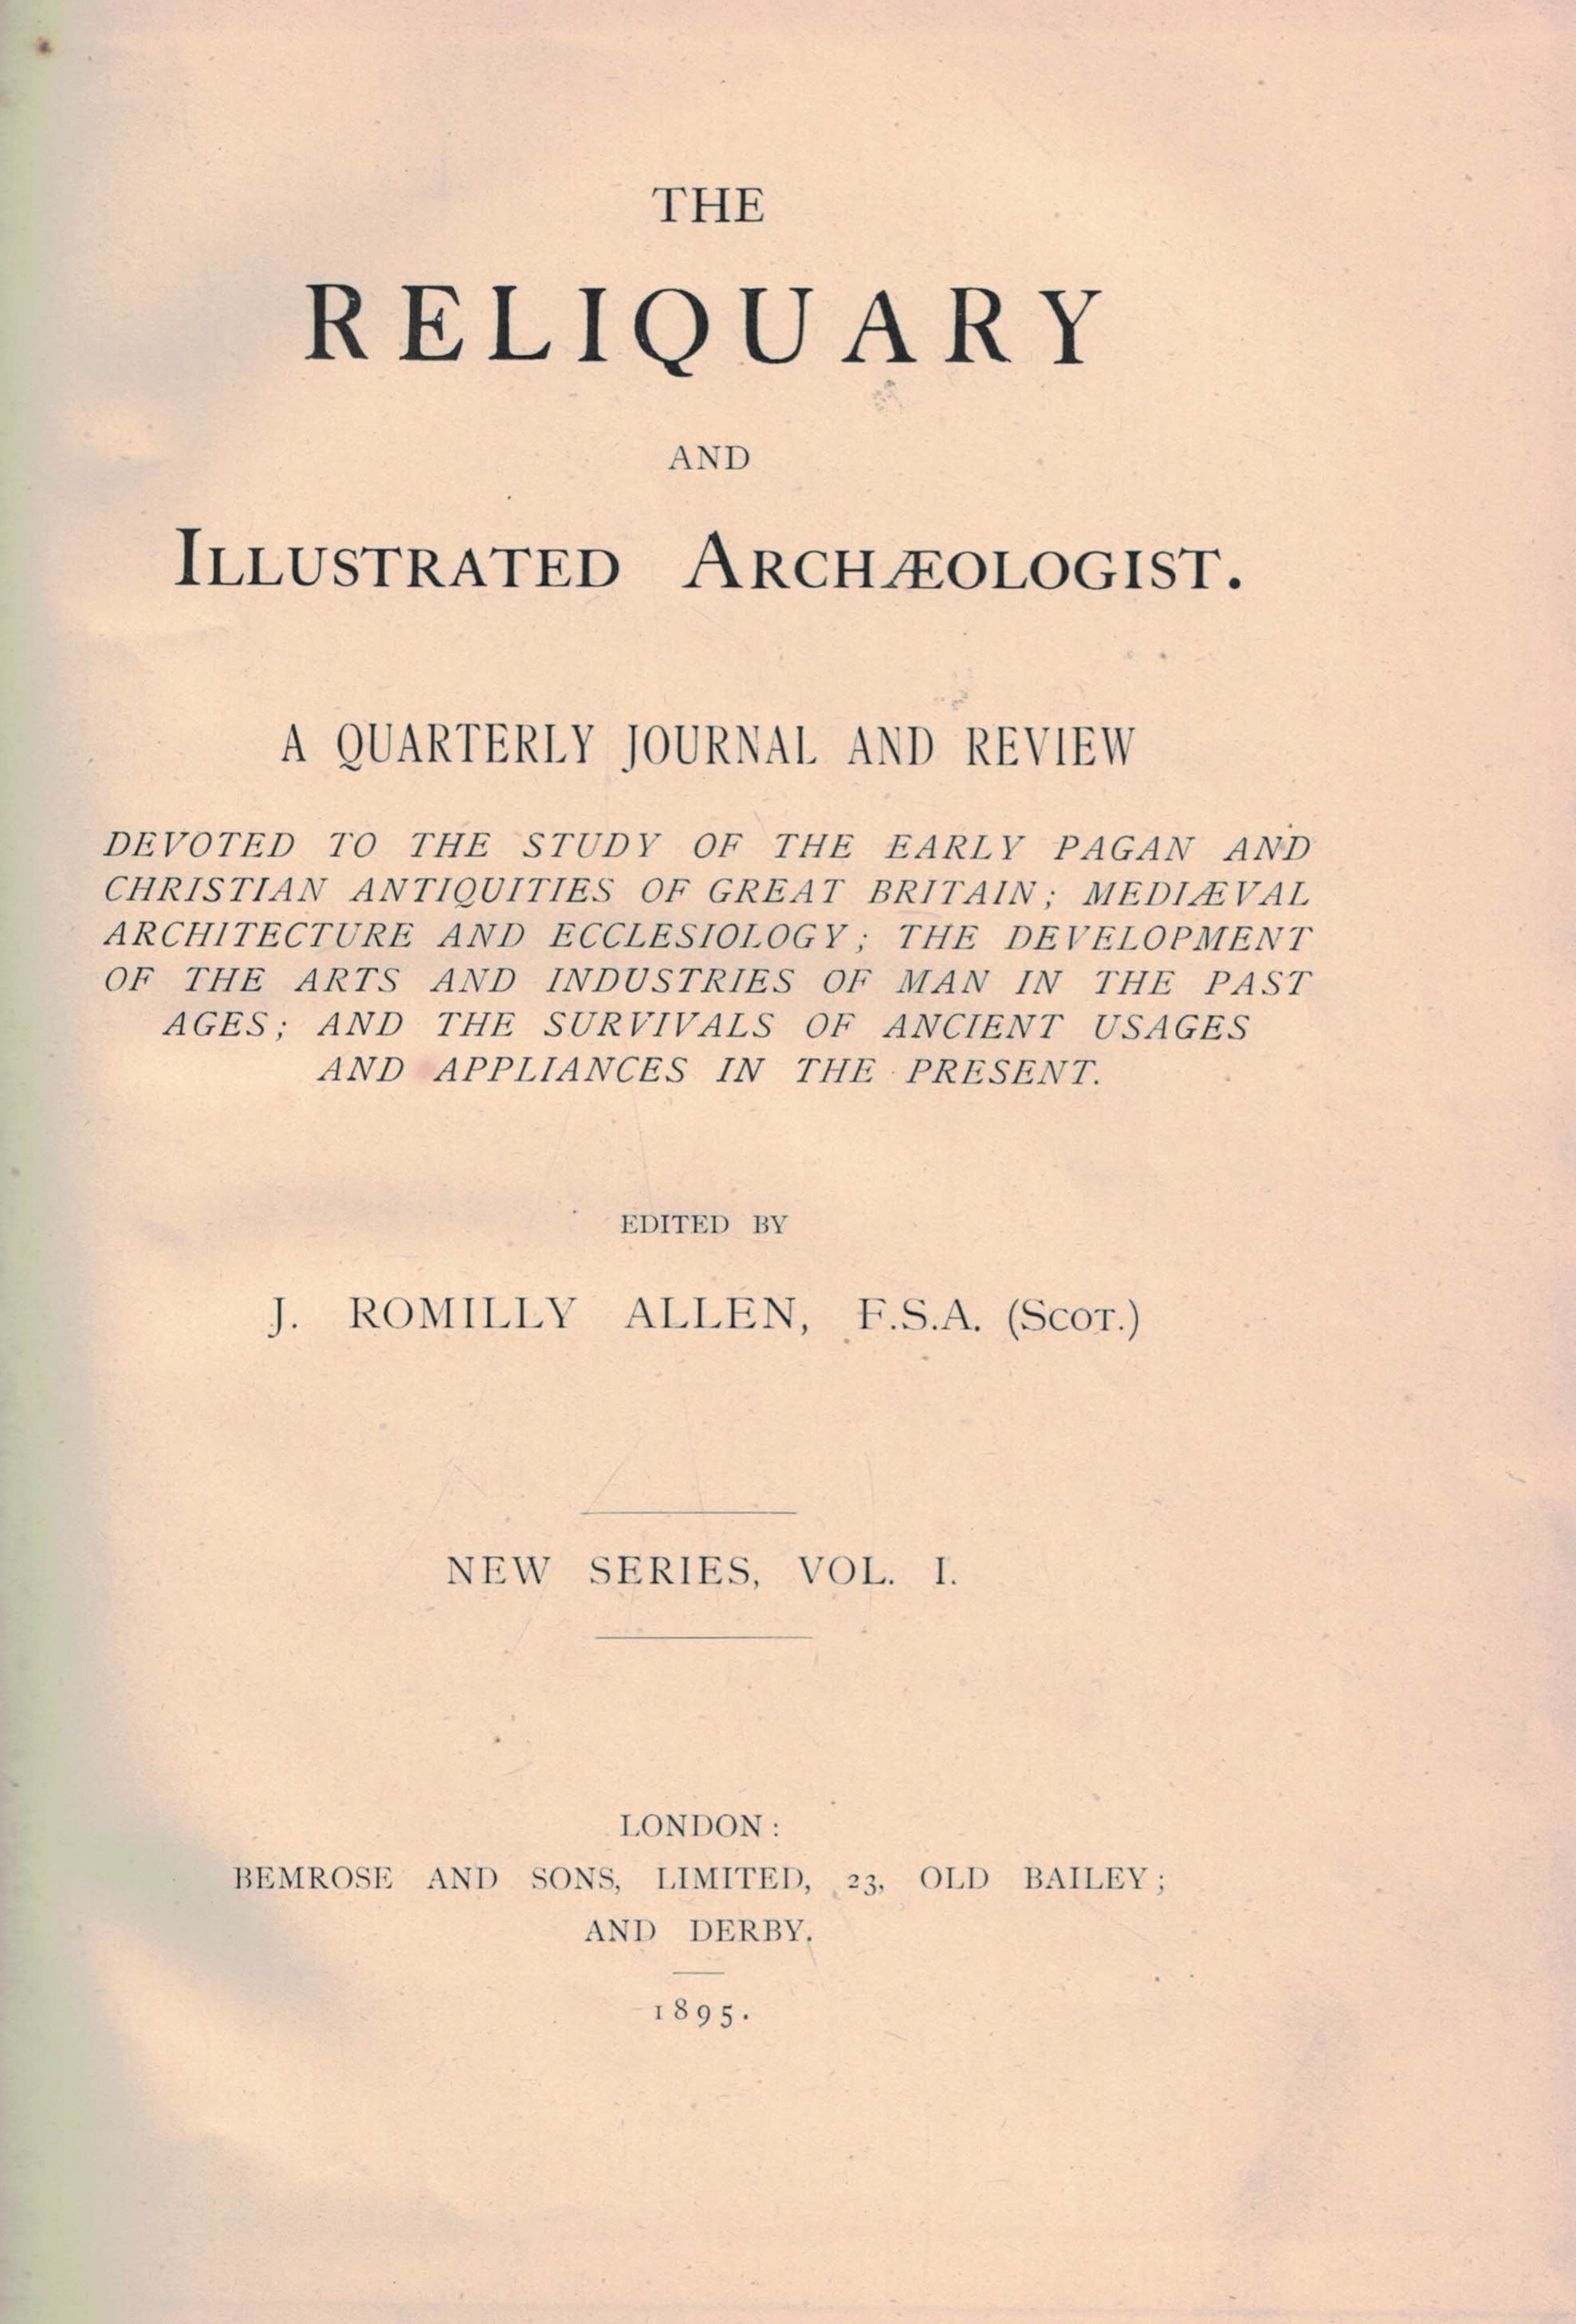 The Reliquary and Illustrated Archaeologist. New Series. Vols 1 and 2.